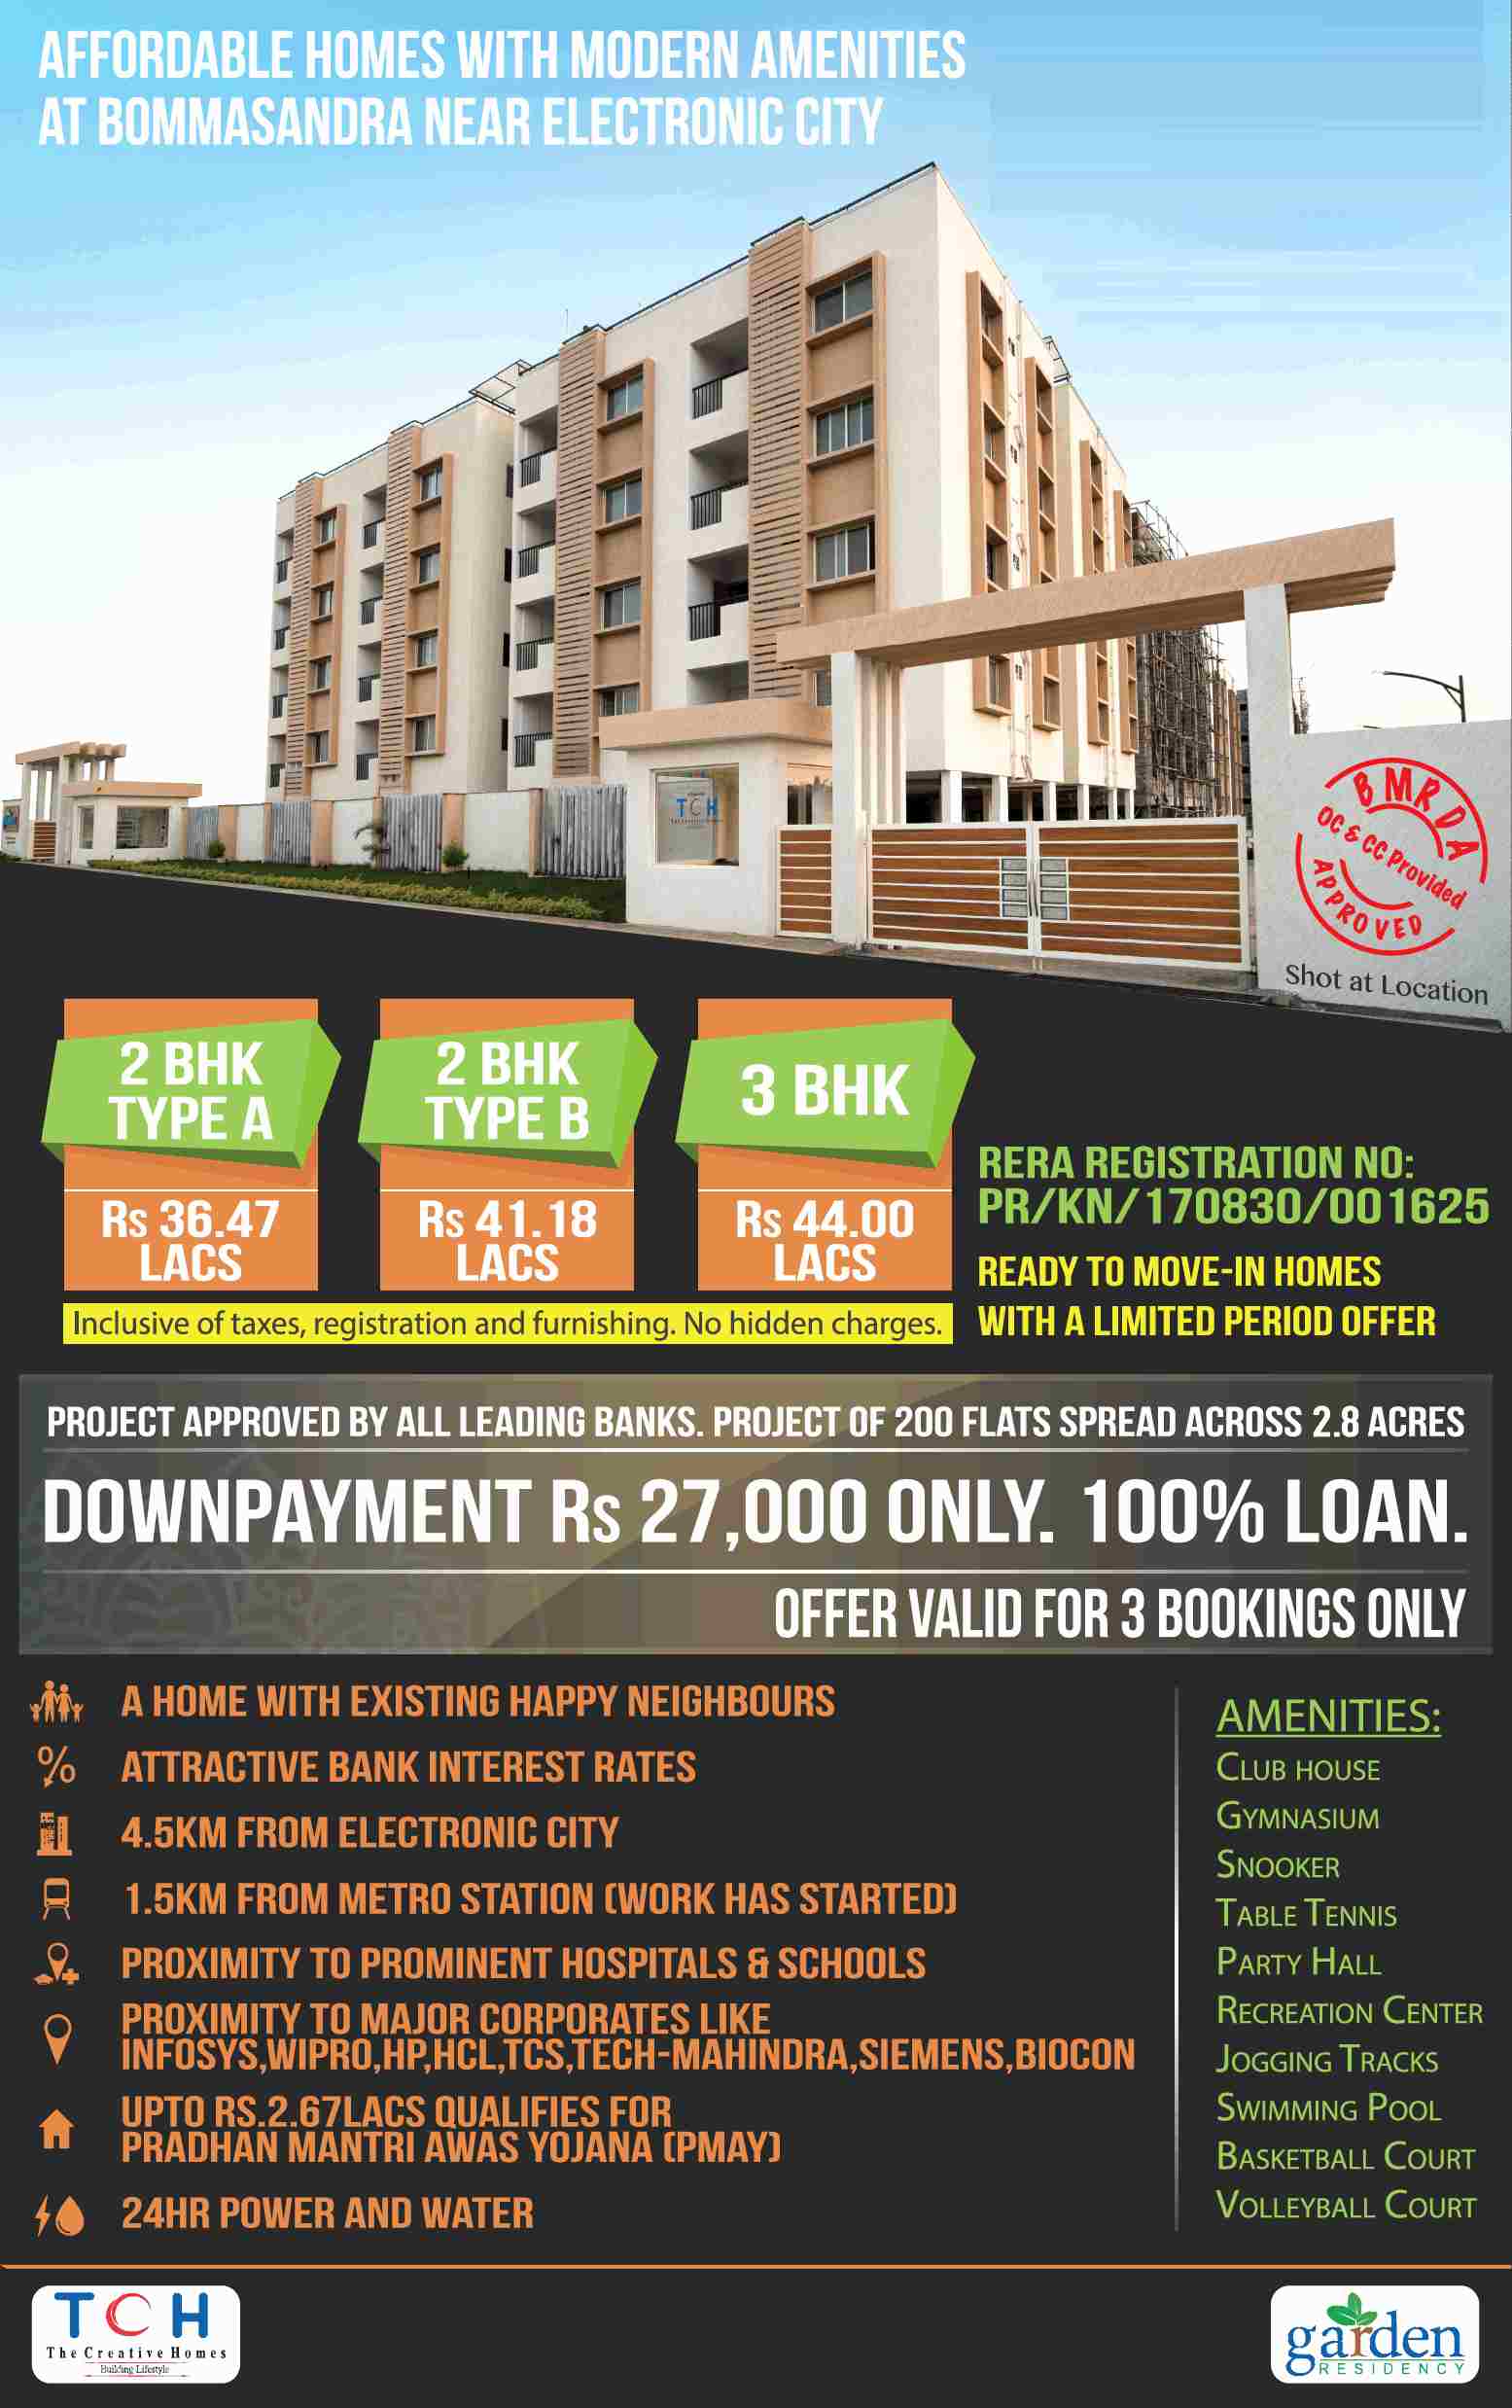 Book ready to move homes with limited period offer at TCH Garden Residency in Bangalore Update